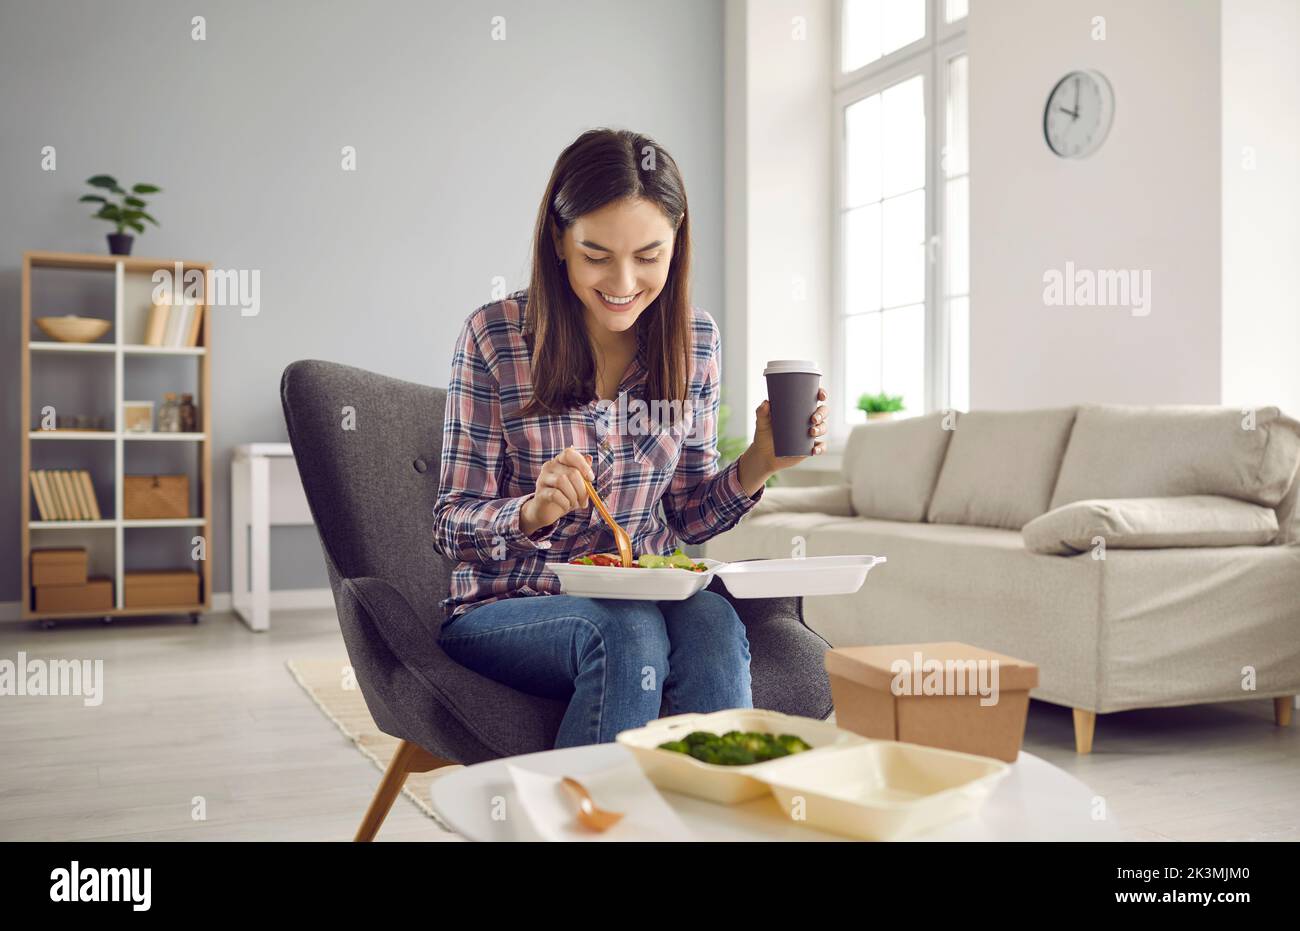 Happy woman drinking coffee and eating vegetable salad from takeout meal delivery Stock Photo